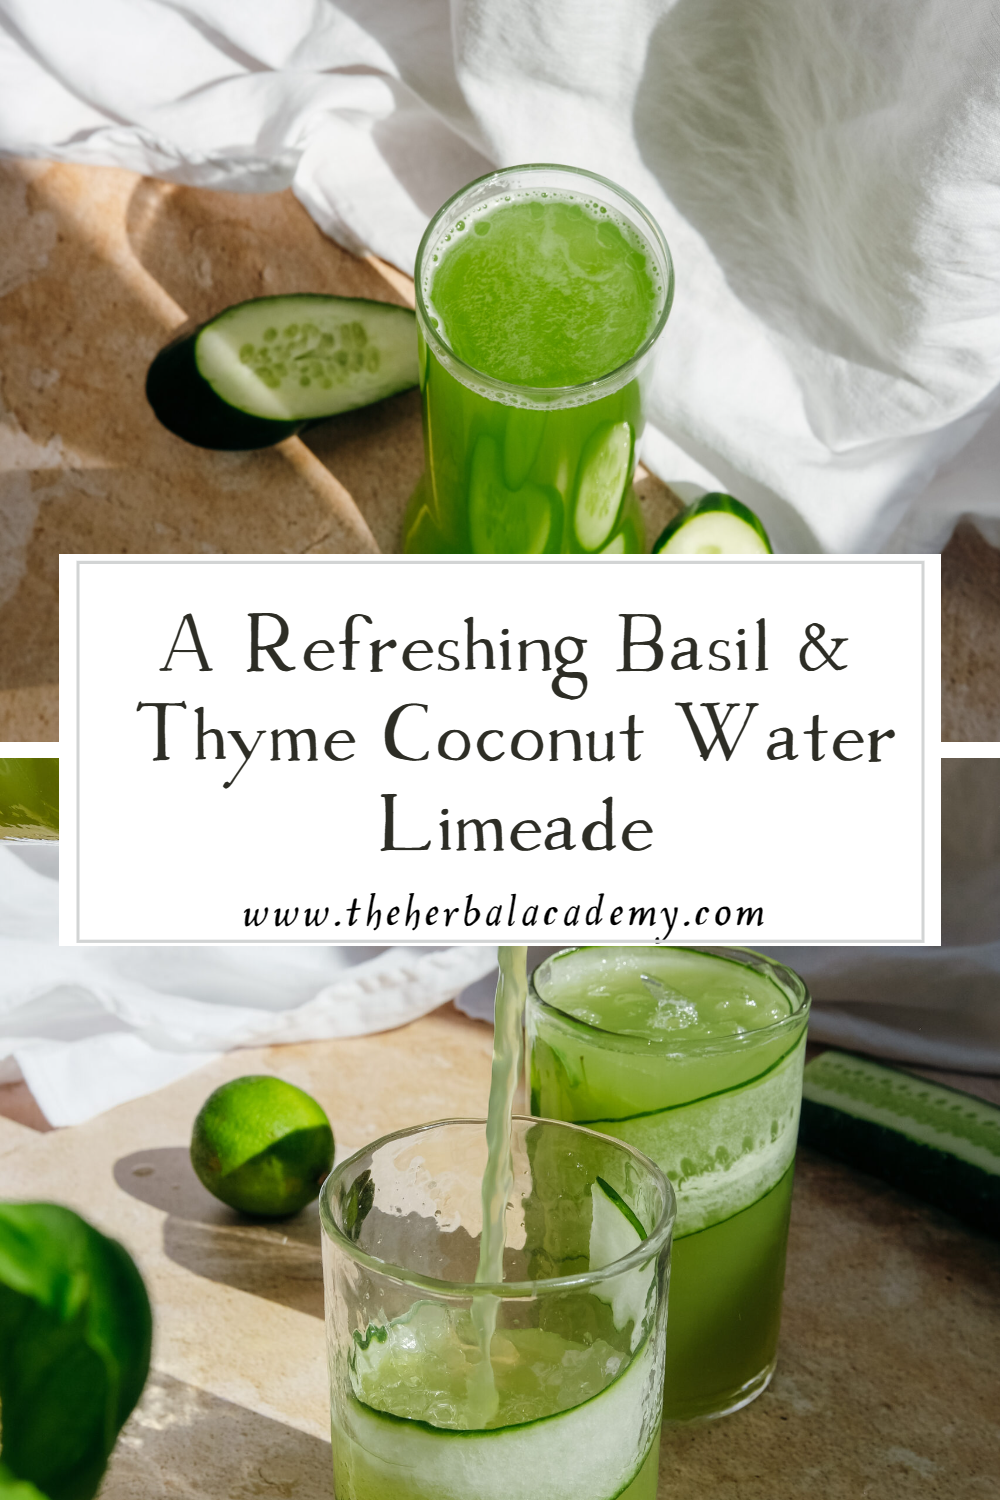 A Refreshing Basil & Thyme Coconut Water Limeade | Herbal Academy | Basil and thyme added to the coconut water limeade in this recipe add a beautiful aroma reminiscent of the Mediterranean.